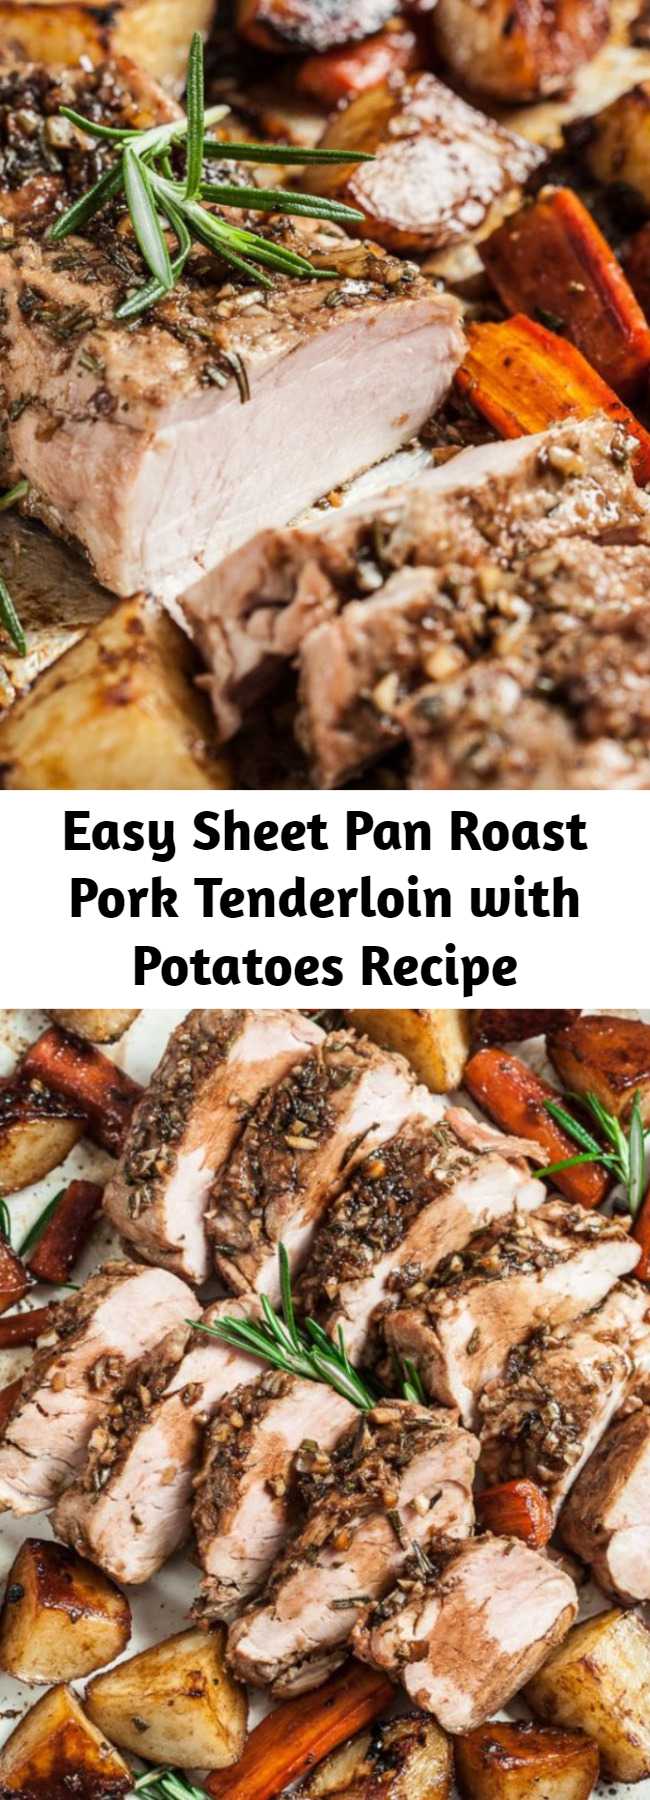 Easy Sheet Pan Roast Pork Tenderloin with Potatoes Recipe - This Sheet Pan Roast Pork Tenderloin with Potatoes is extremely tender, succulent, and healthy. This pork tenderloin recipe is easy enough for a weeknight meal and delicious enough for serving to guests. Little effort with big results.